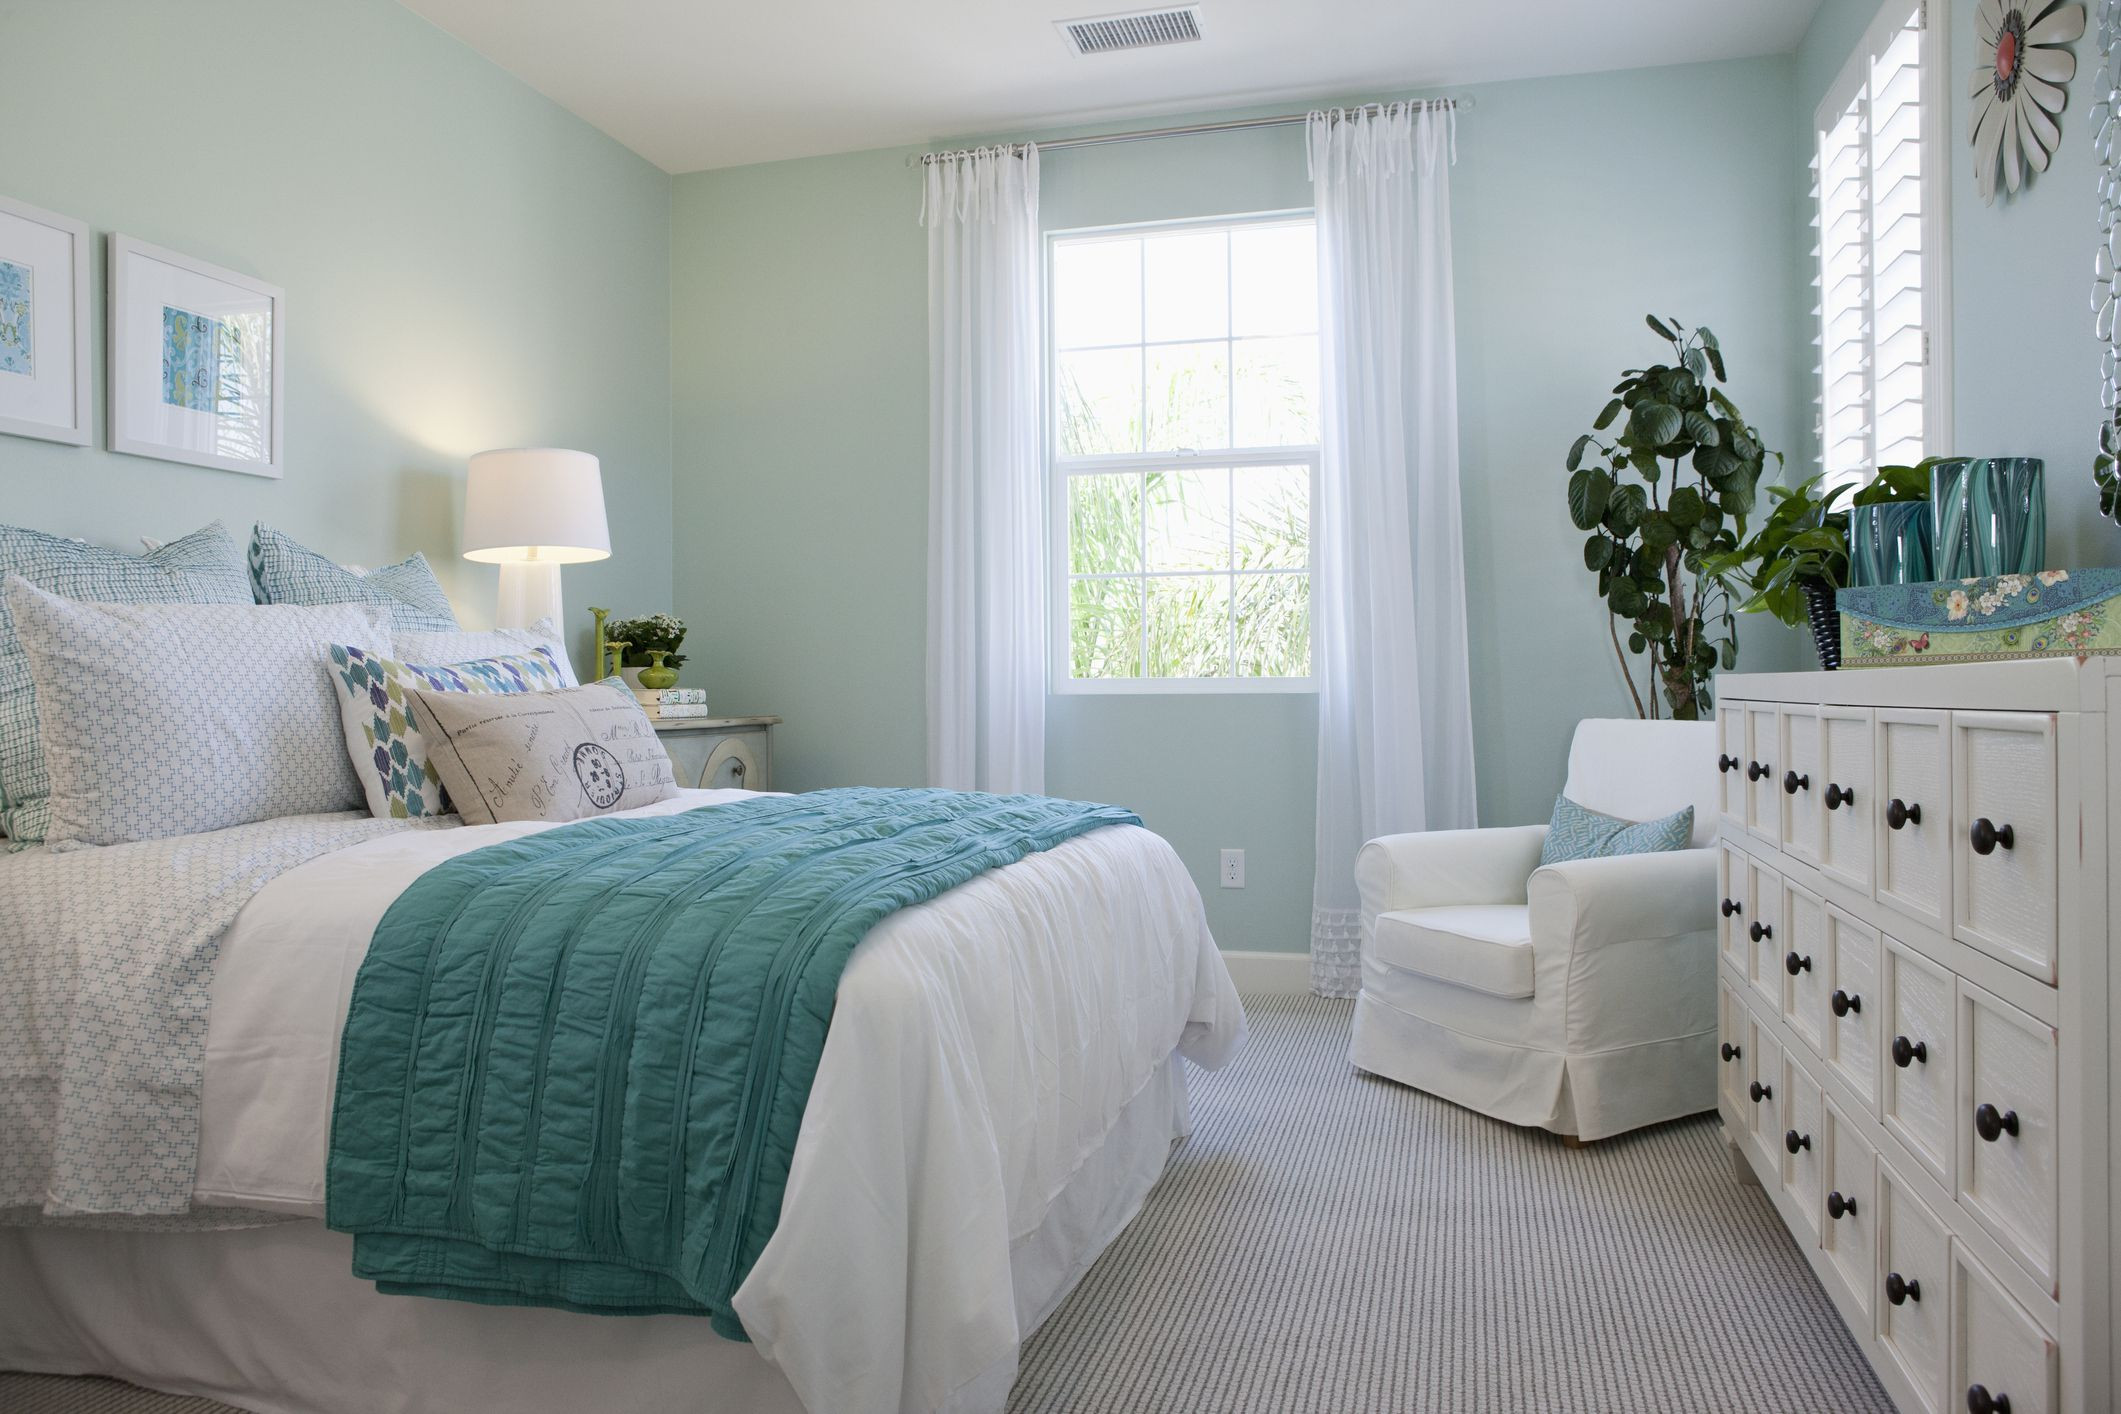 Bedroom Paint Colors
 How to Choose the Right Paint Colors for Your Bedroom